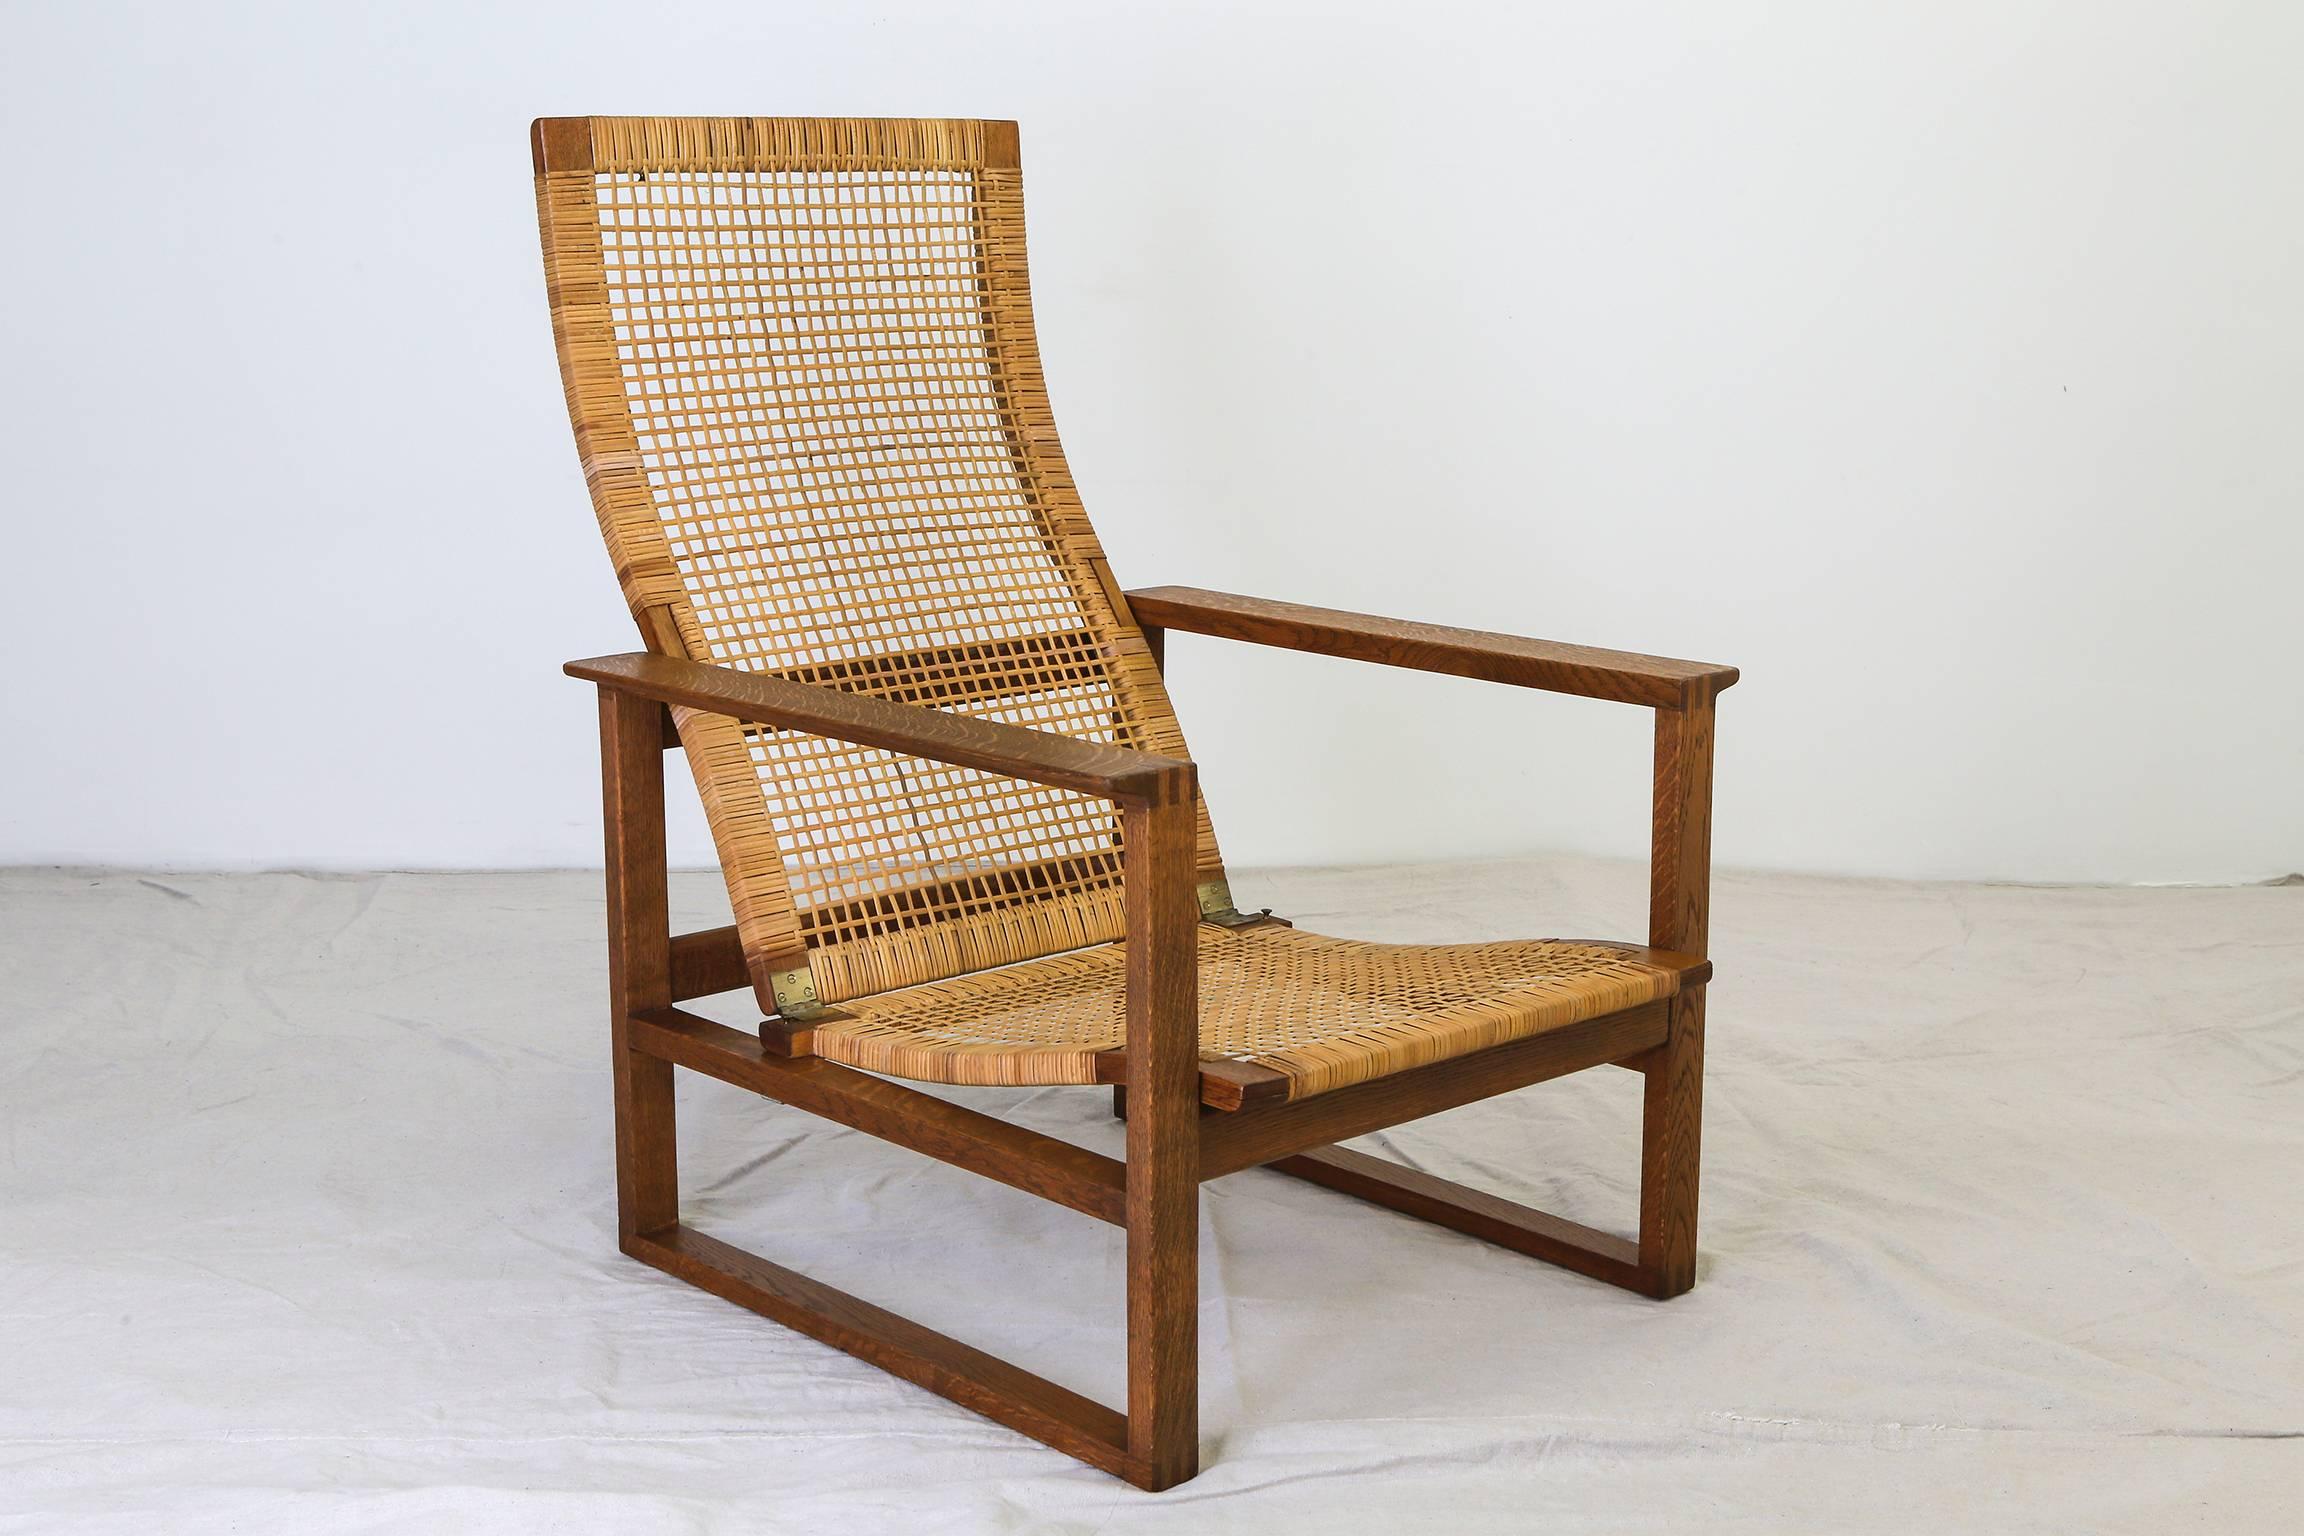 A pair of open frame lounge chairs with matching ottomans by Danish designer Børge Mogensen manufactured by Fredericia Stolefabrik, circa 1956. Each set featuring a sled-base chair with oak frame, a caned seat with adjustable caned back, and a